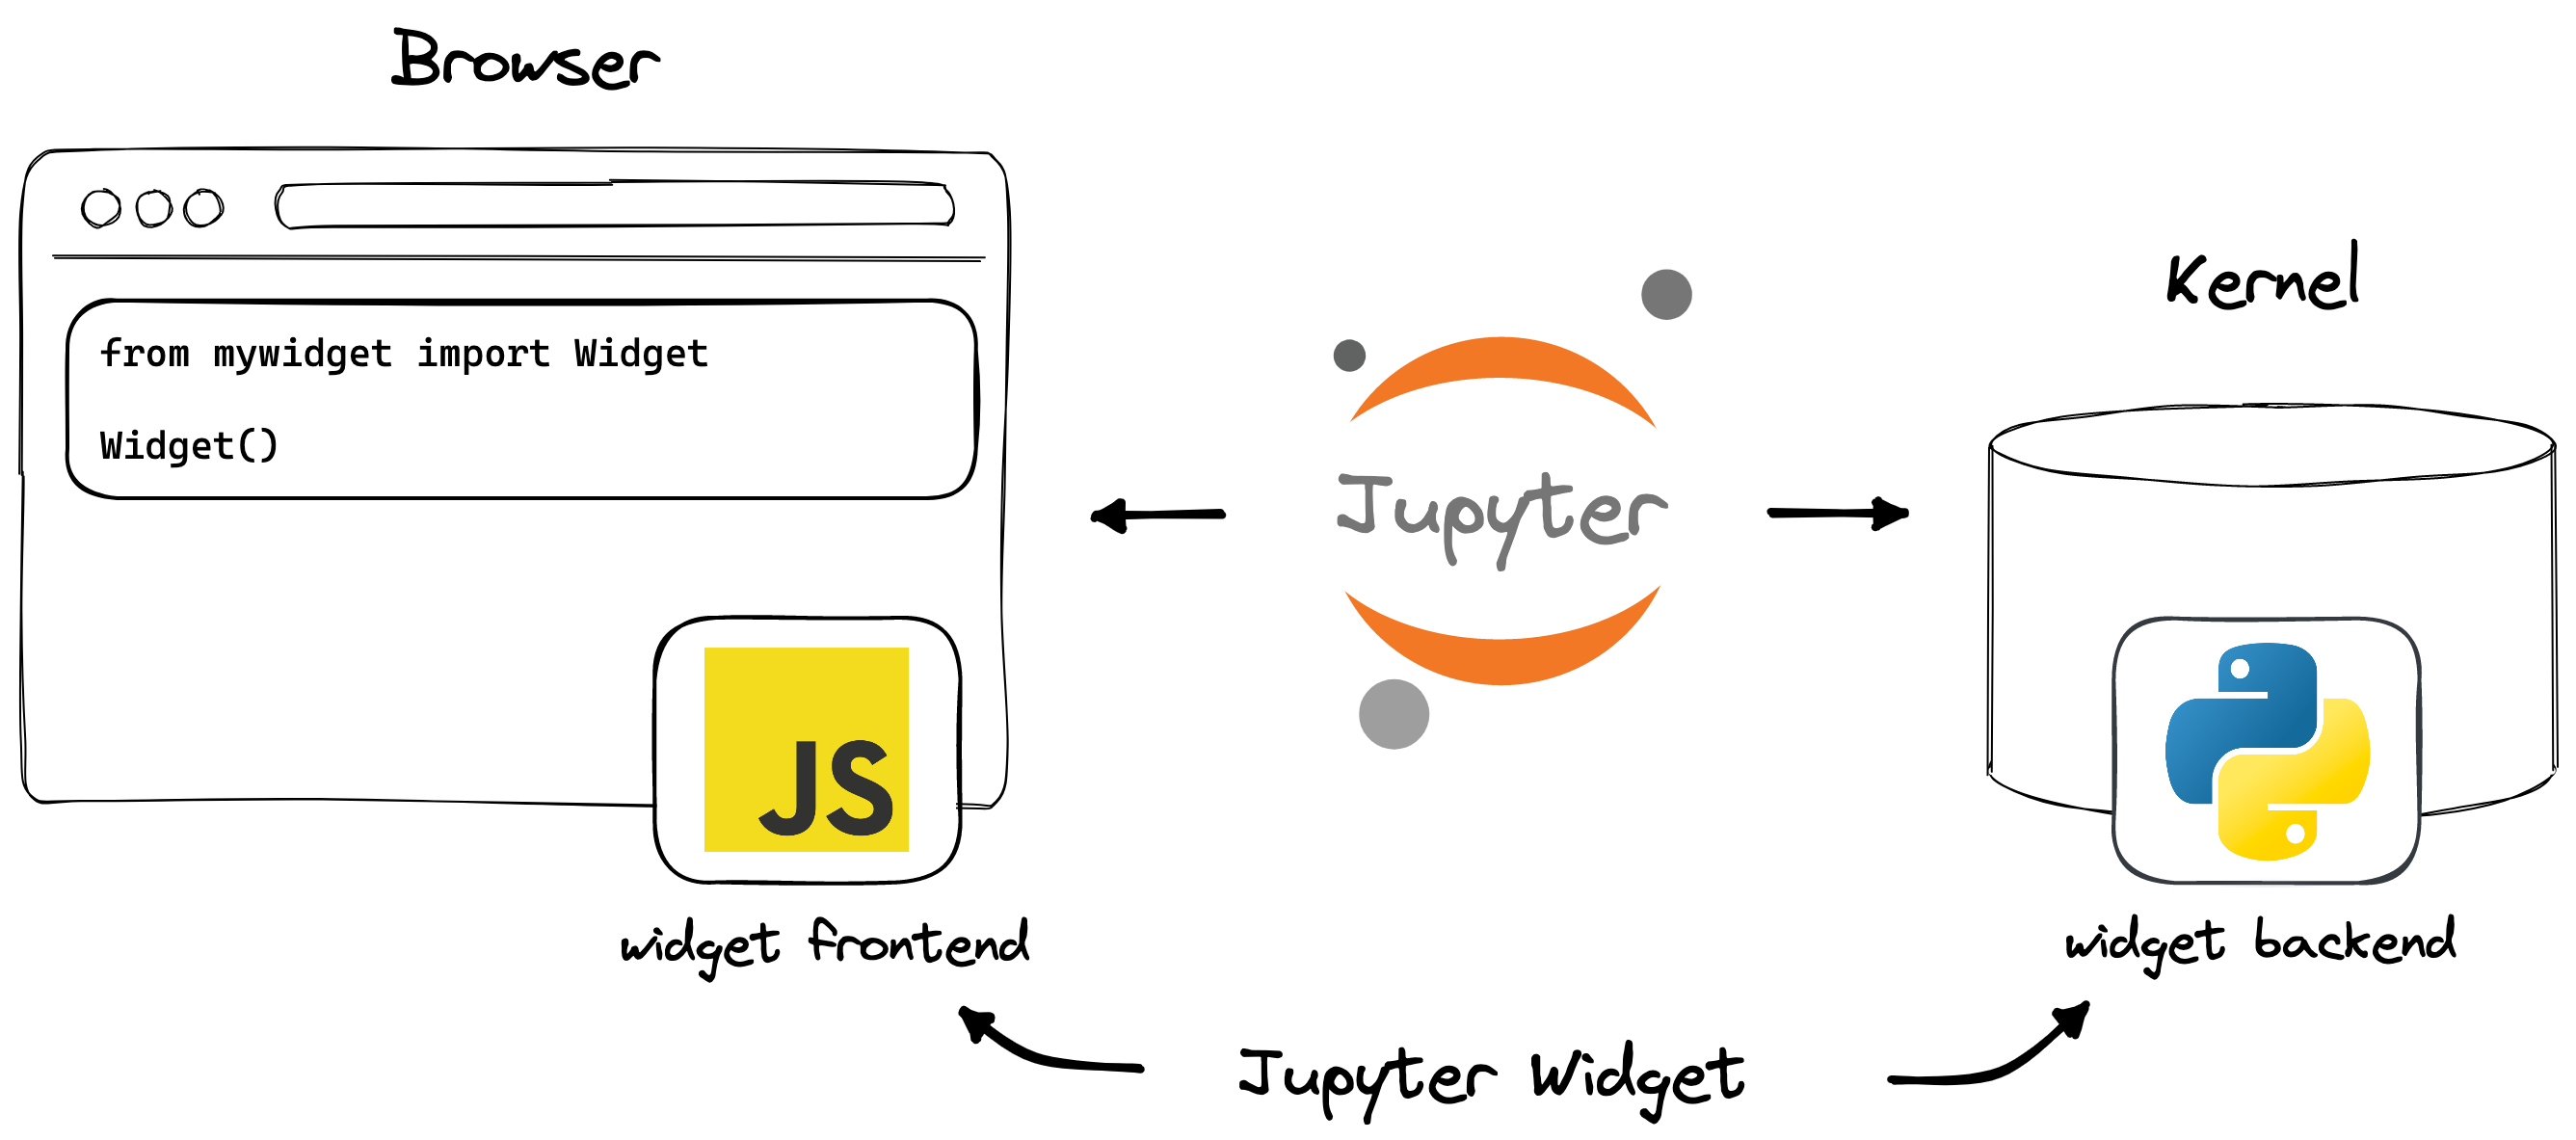 two components of a Jupyter widget, the JS front end and Python backend